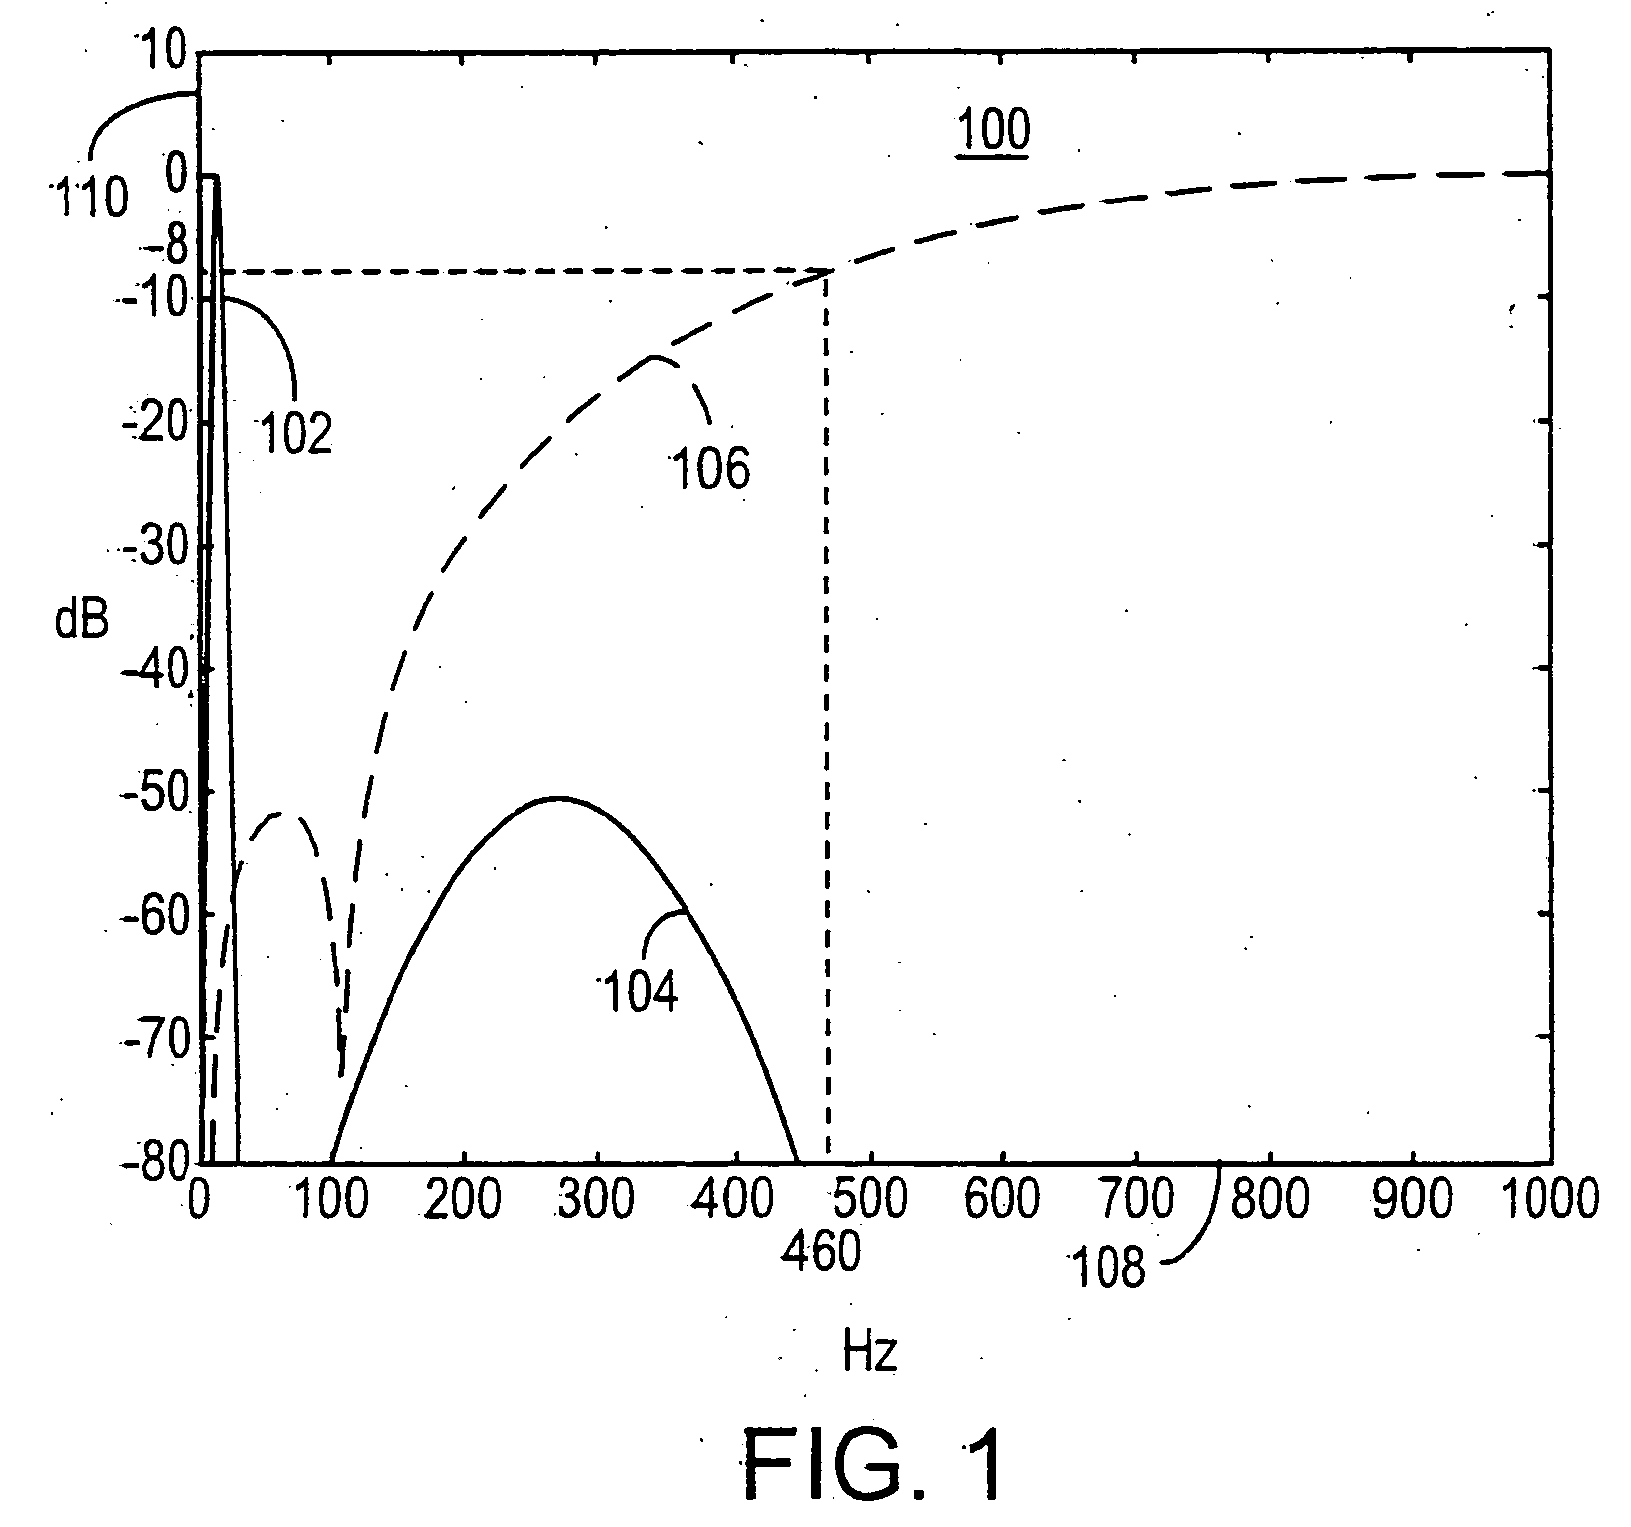 Ultrasound system with iterative high pass filter selection